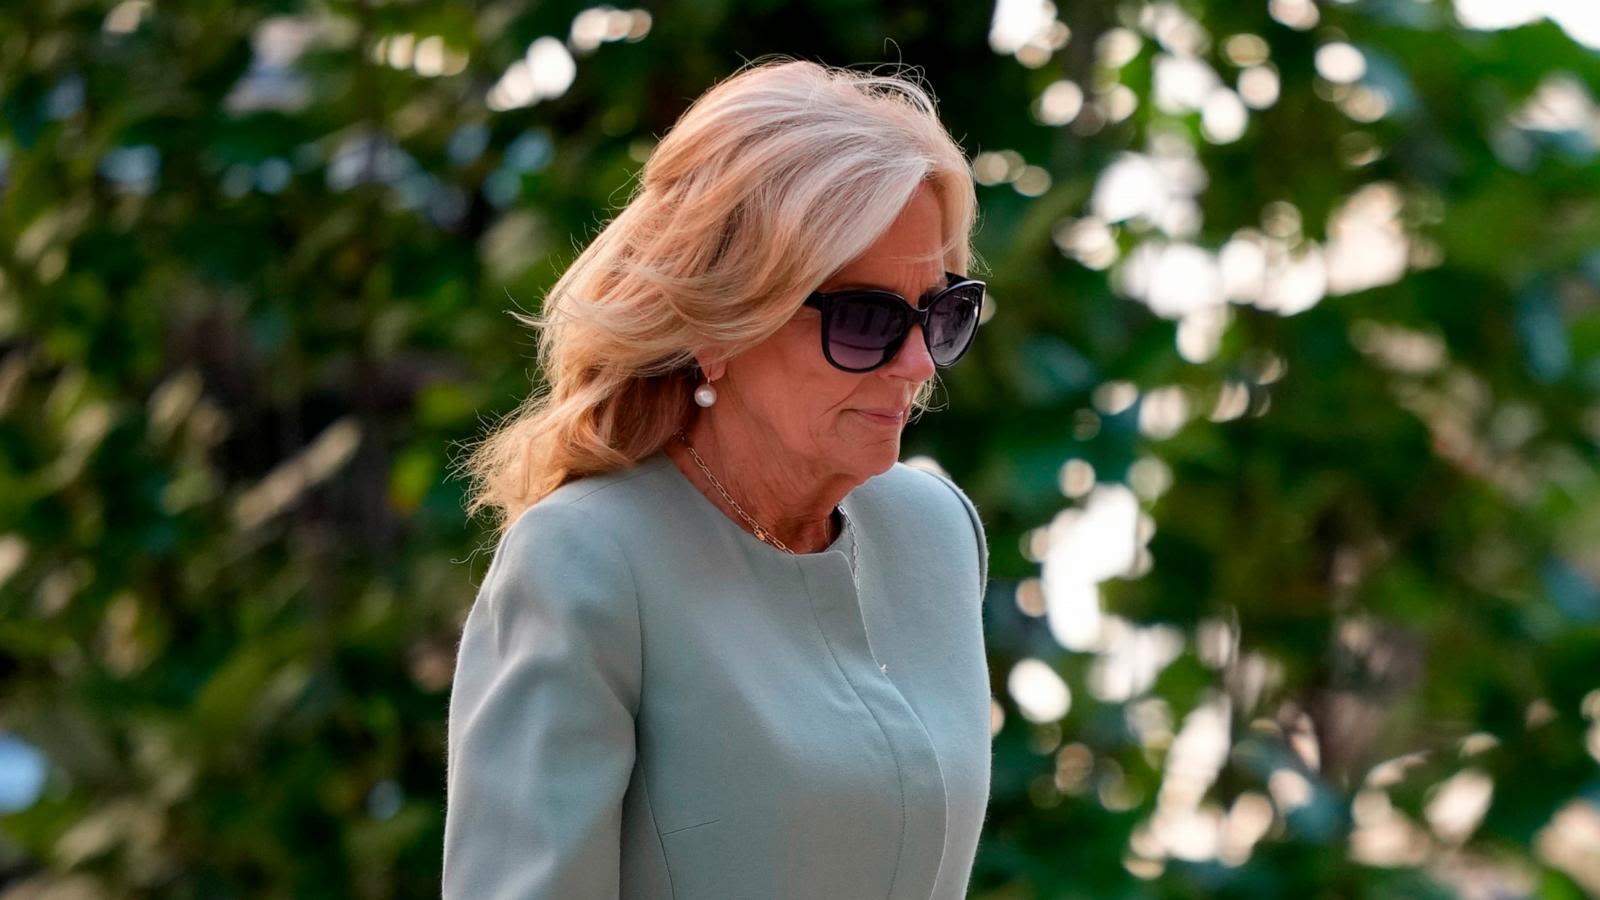 First lady Jill Biden supports Hunter Biden with near daily visits to court during trial